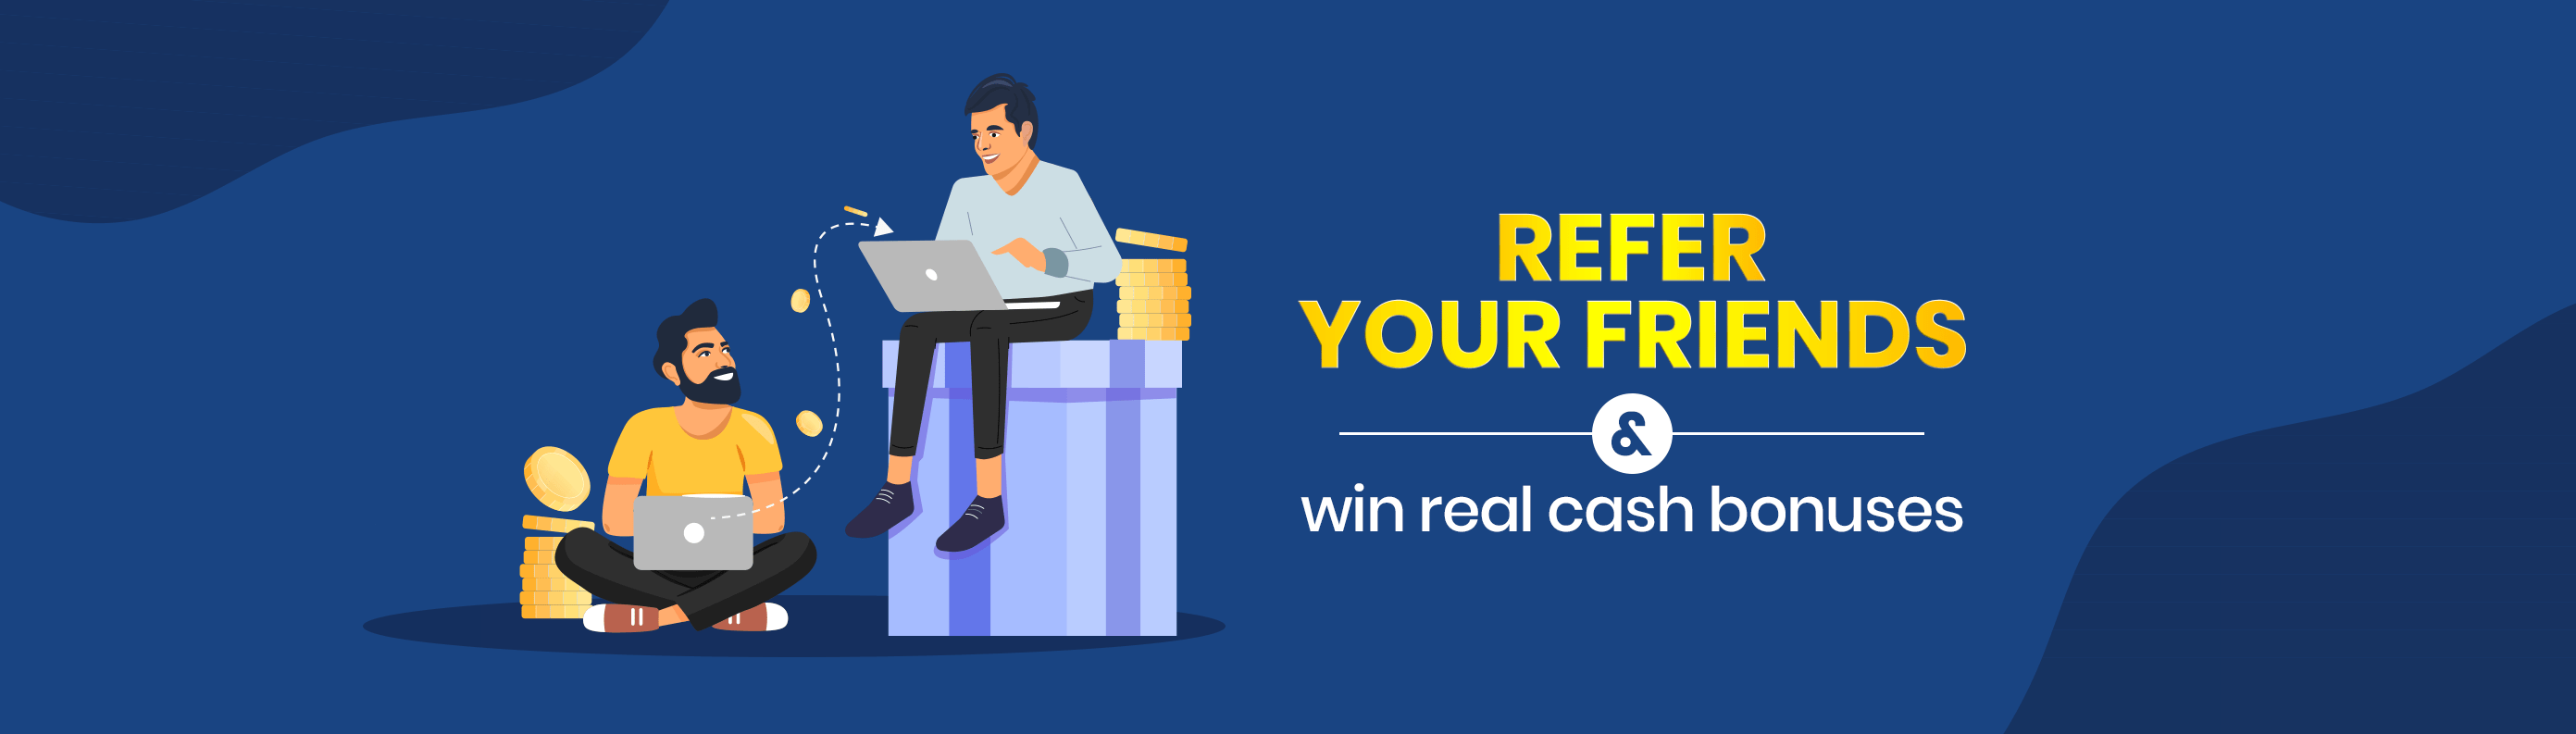 Refer your friends and earn